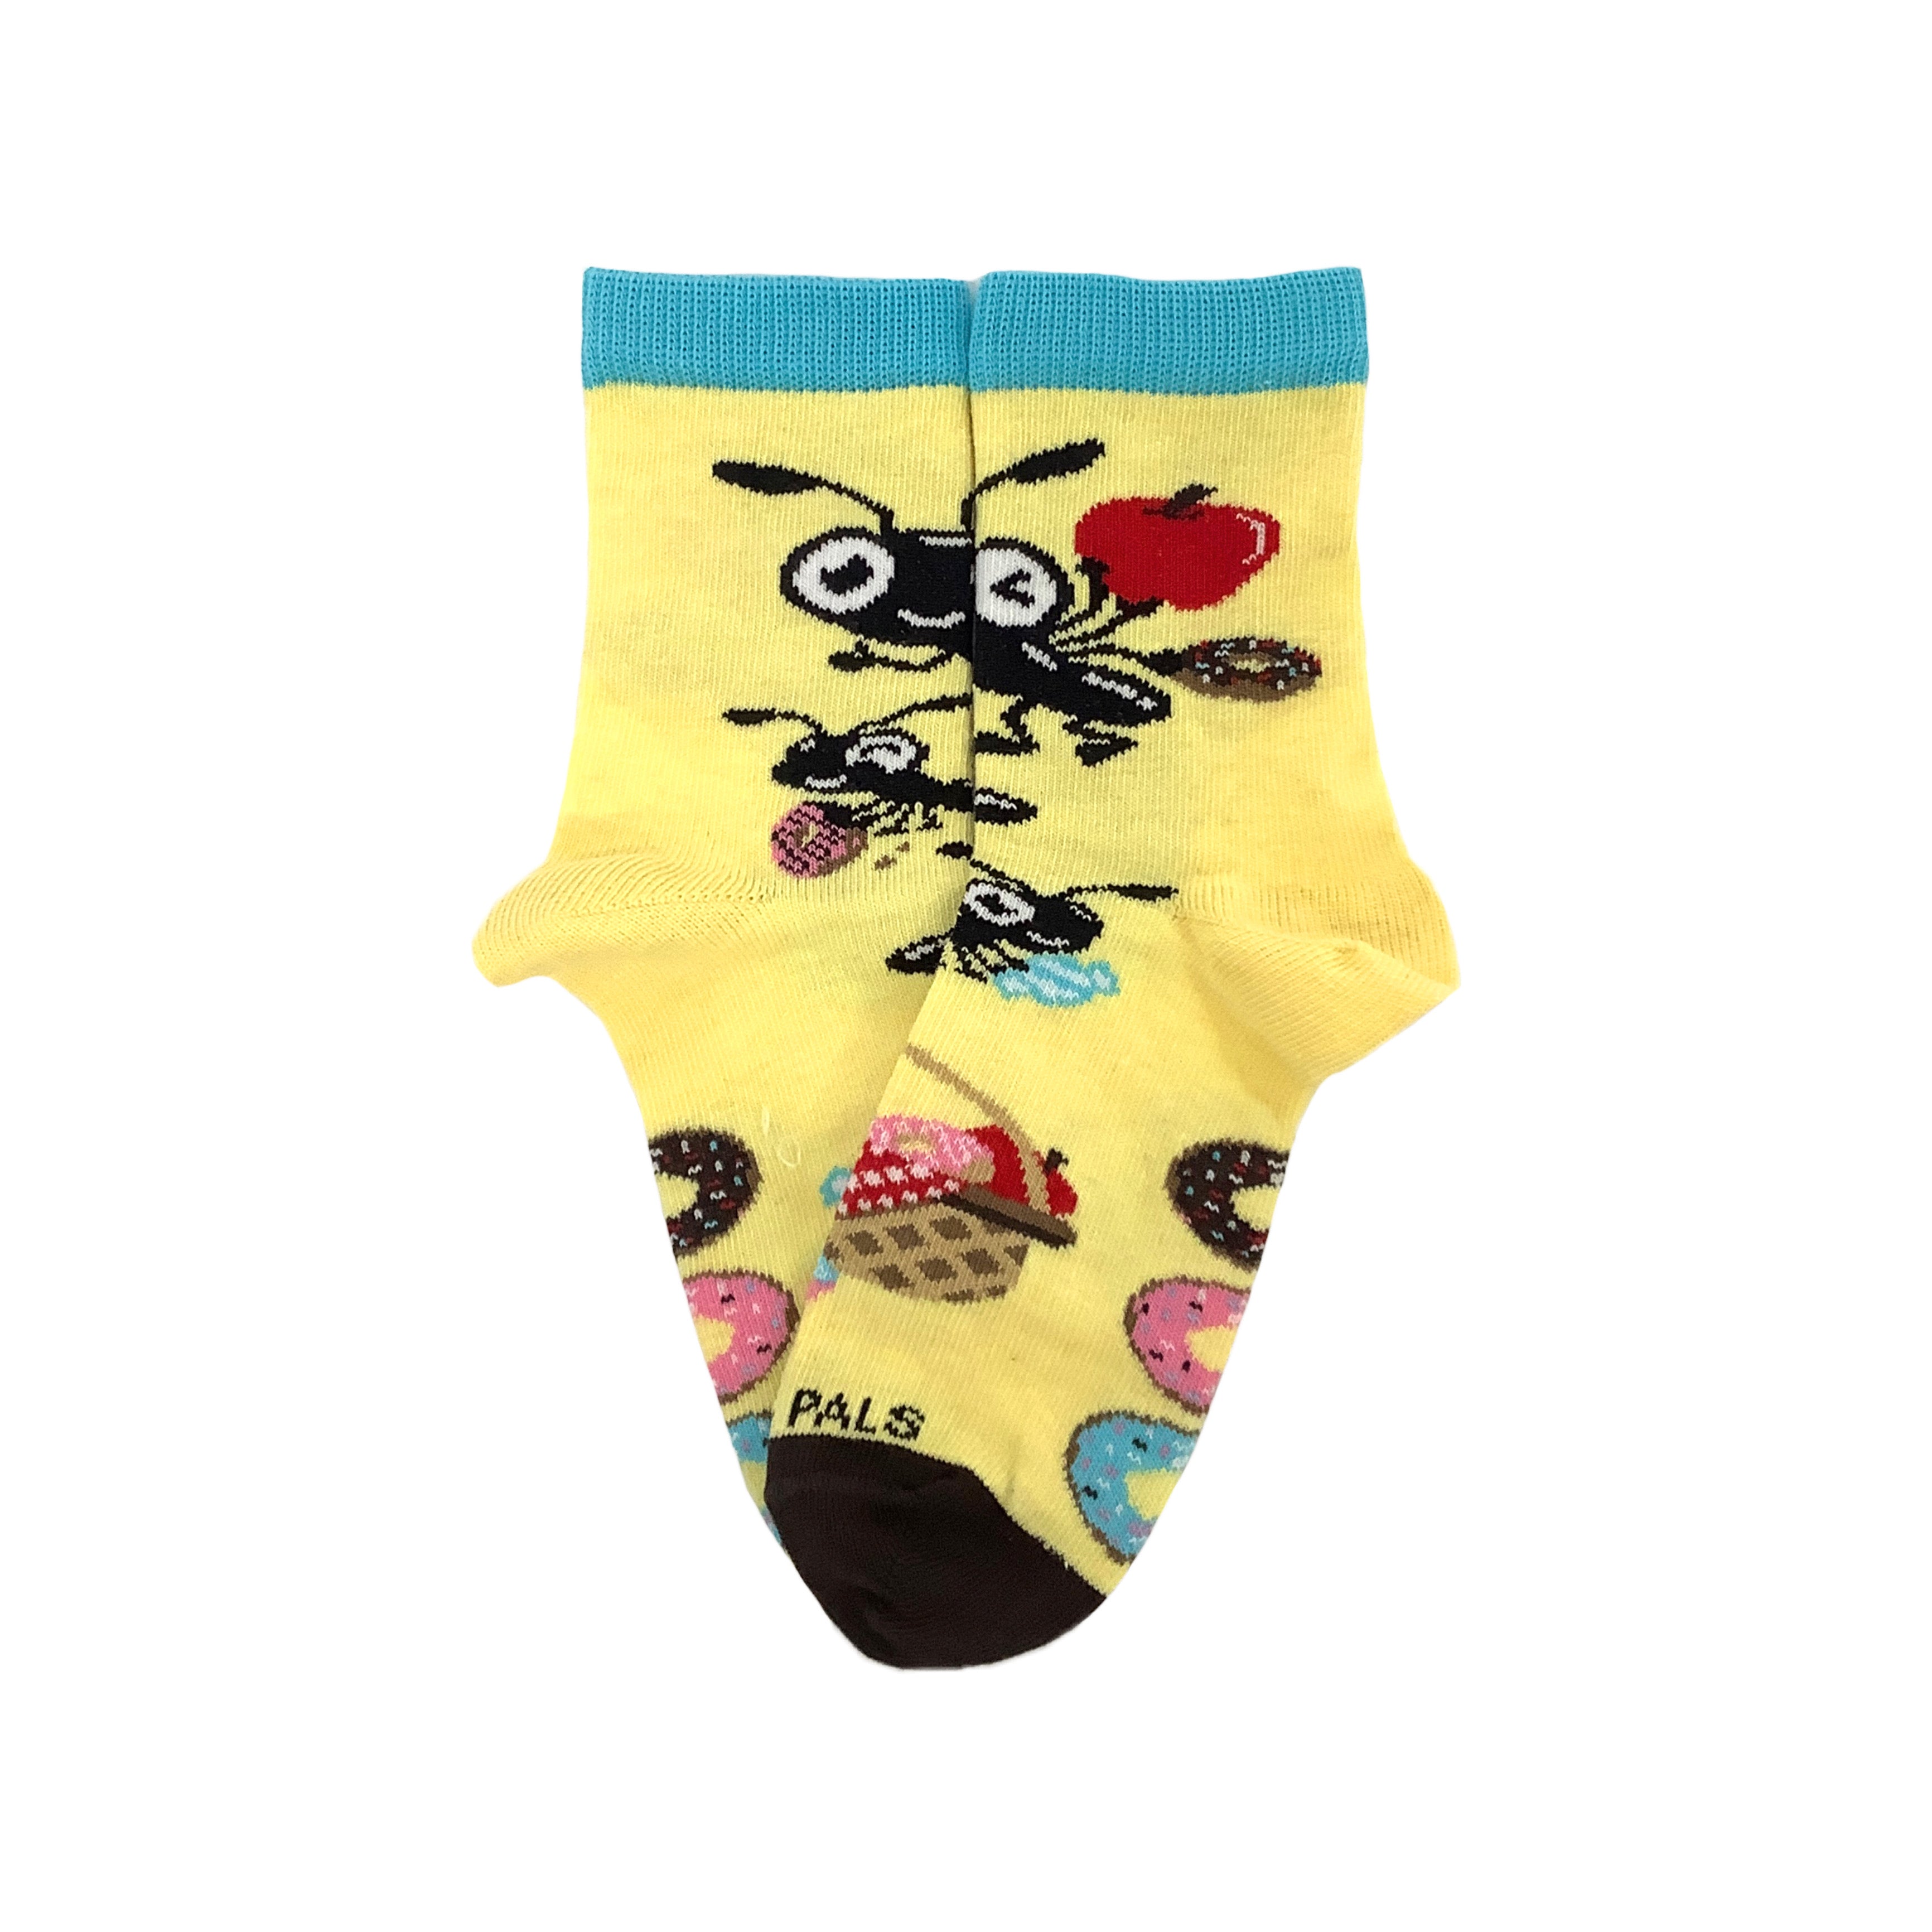 Ant Picnic Donut Feast (2-Pack) from the Sock Panda (Age 3-7)